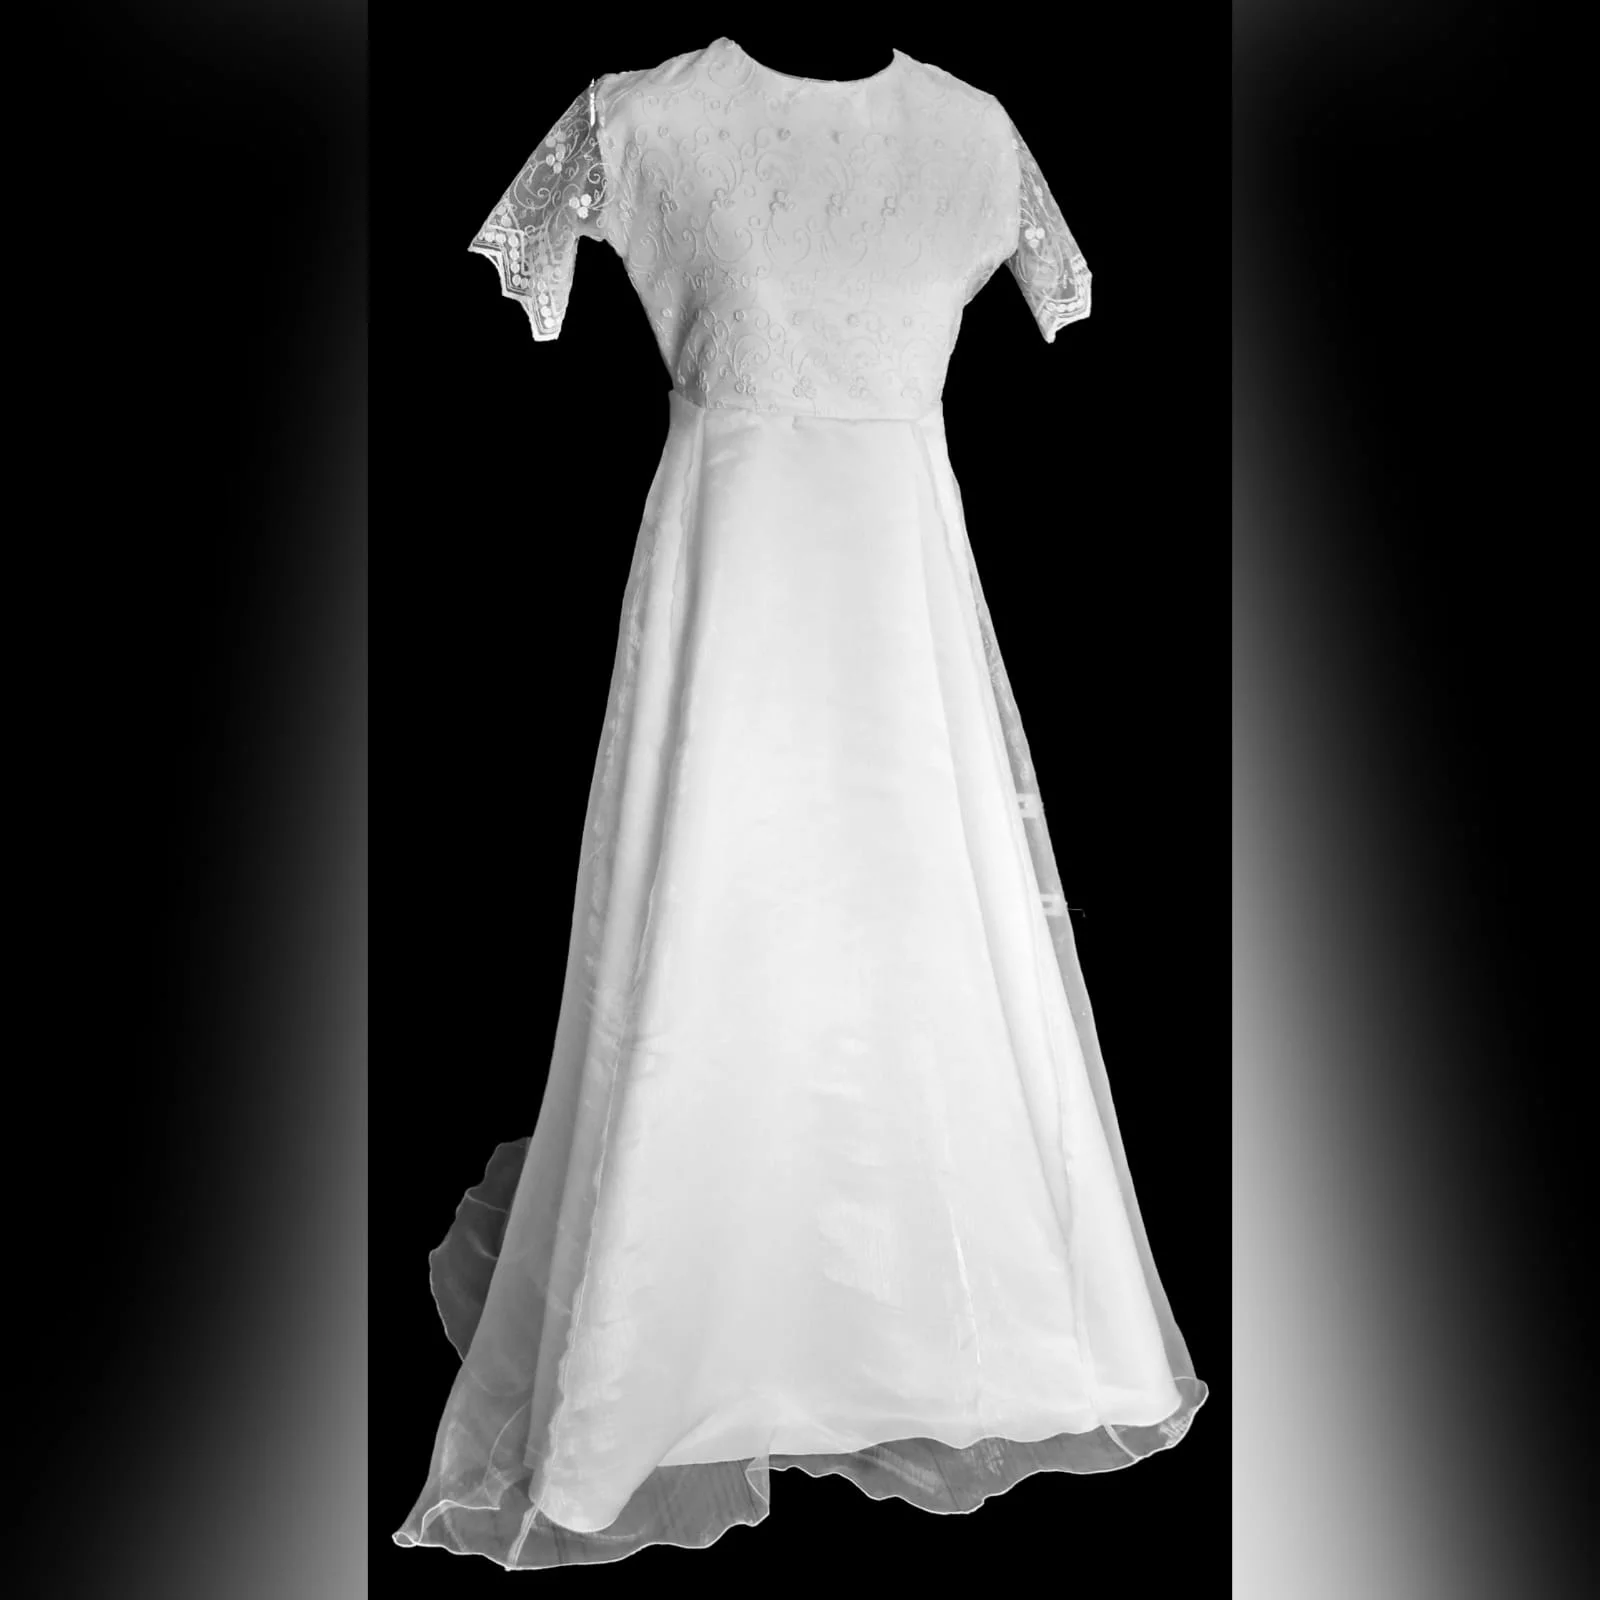 Glitter lace confirmation dress 1 white holy communion dress with a lace glitter bodice and scalloped short sleeves.